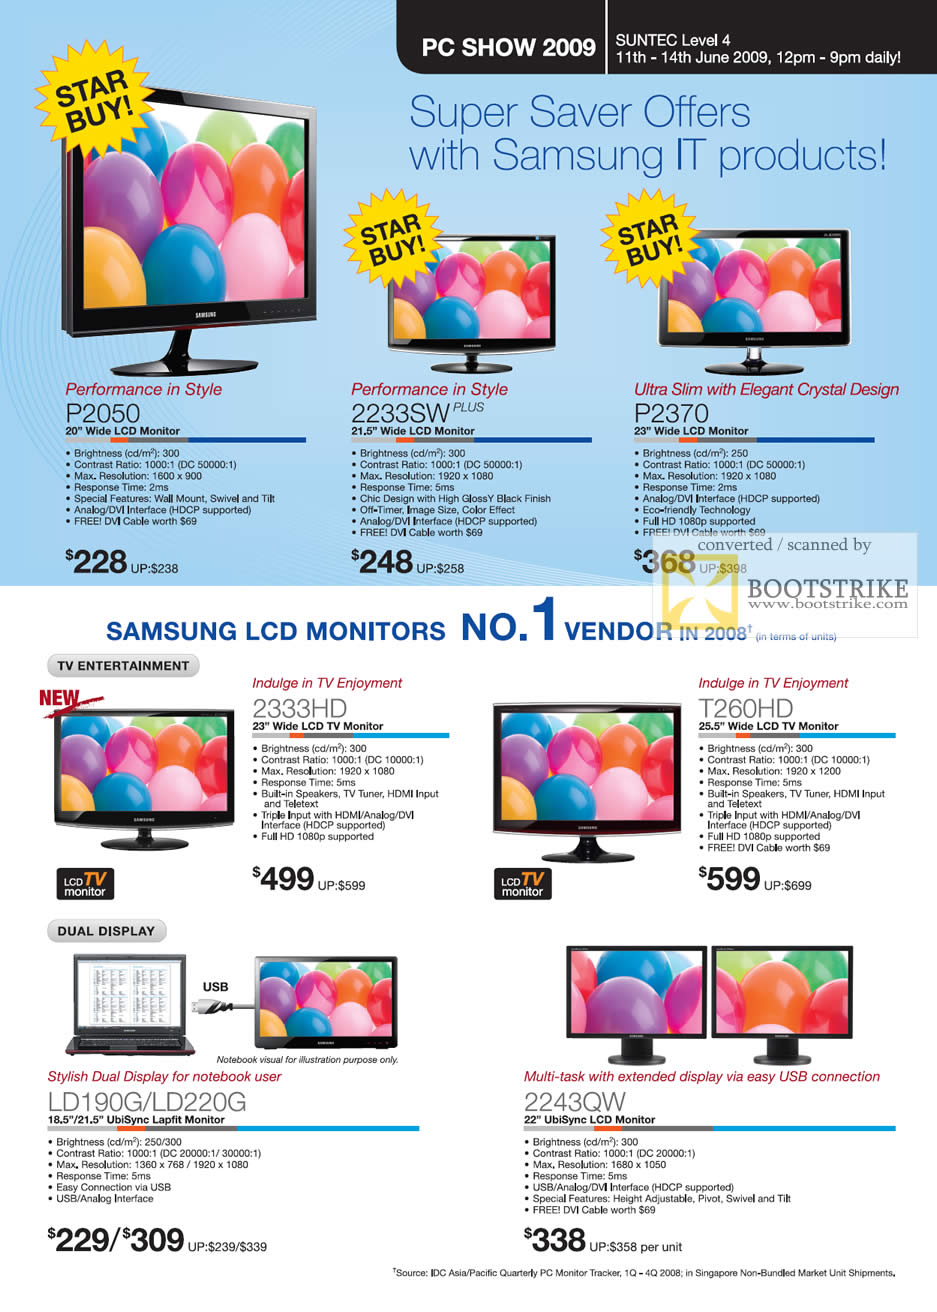 PC Show 2009 price list image brochure of Samsung LCD Monitors